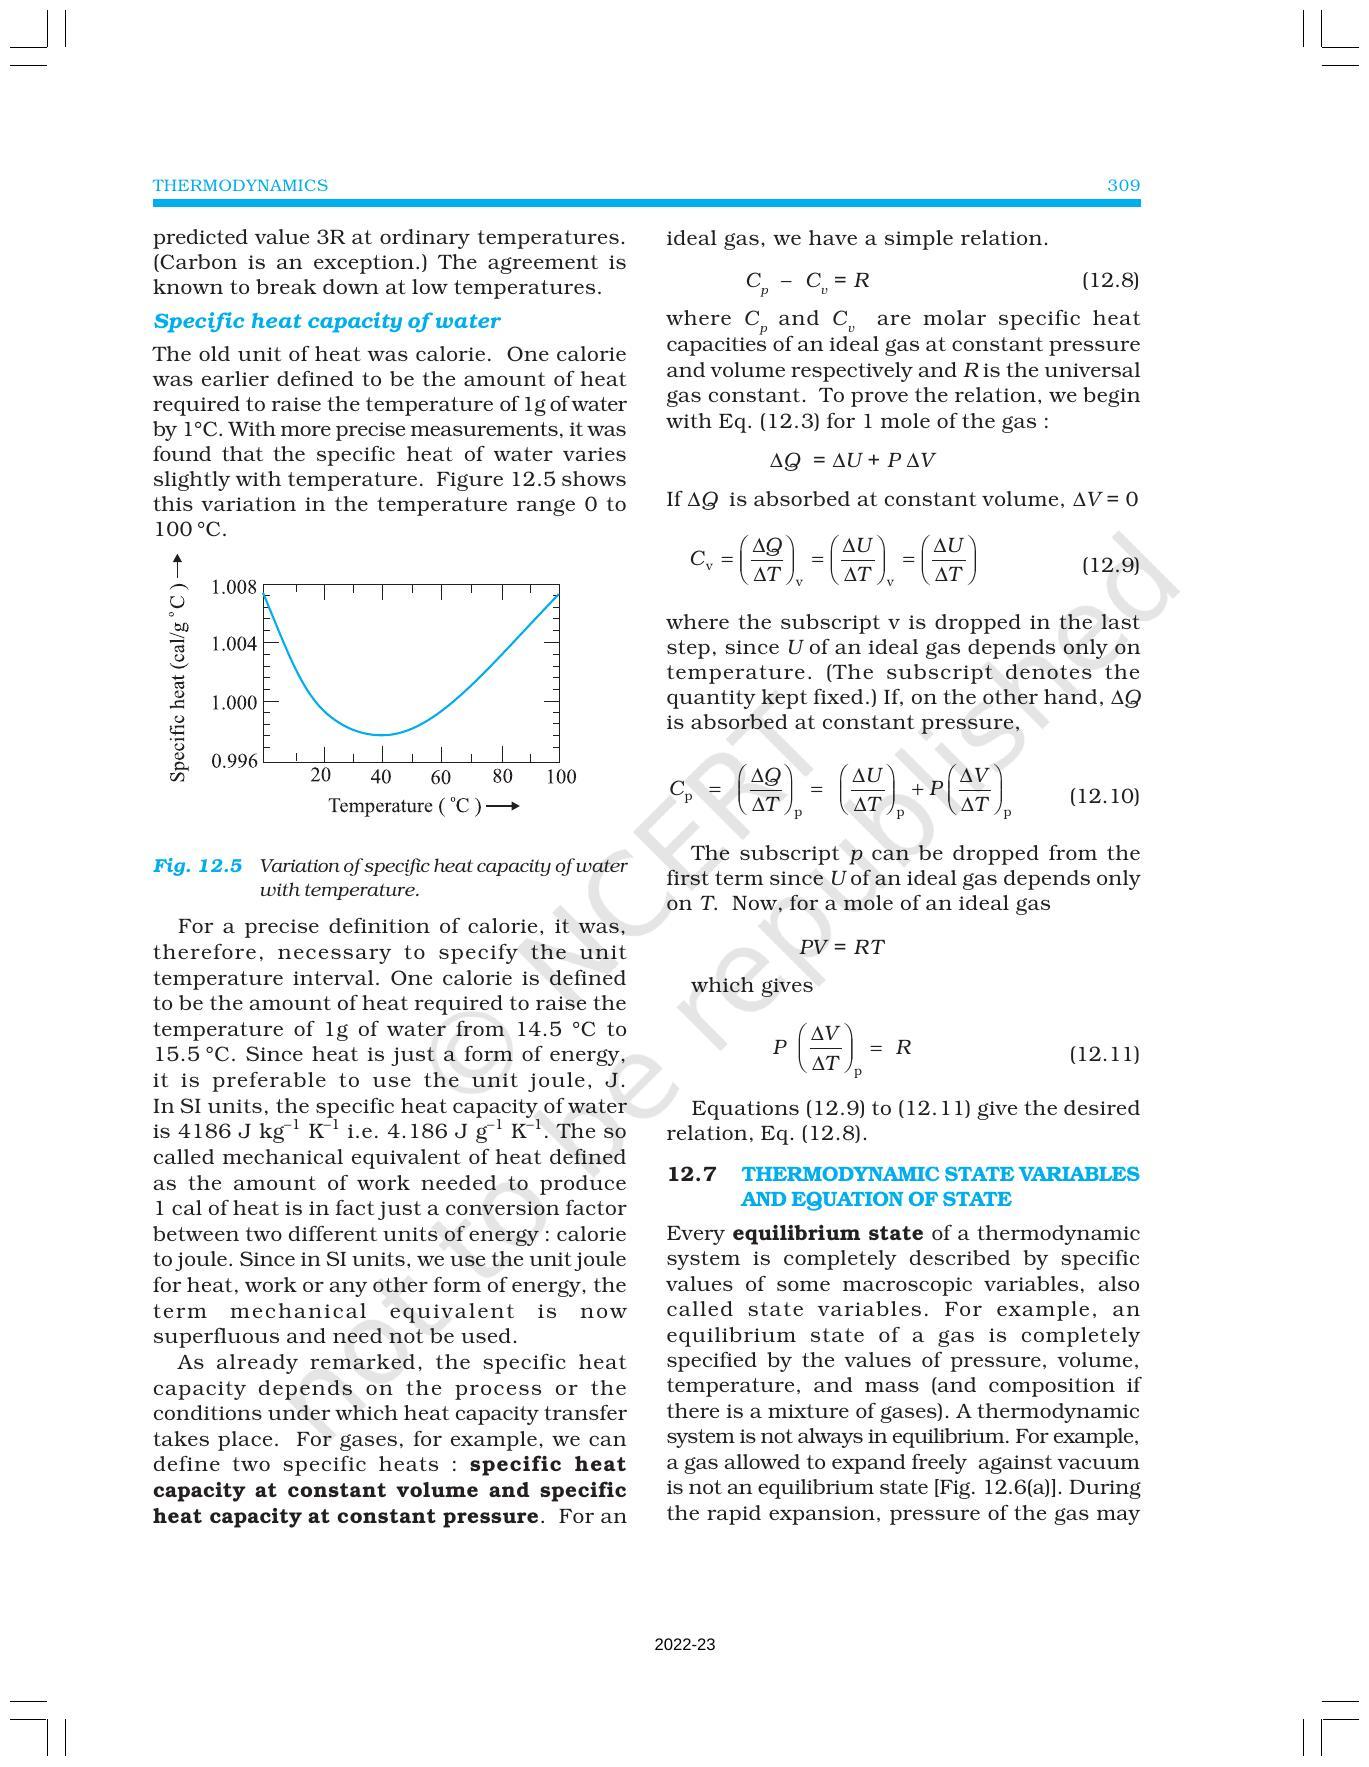 NCERT Book for Class 11 Physics Chapter 12 Thermodynamics - Page 7